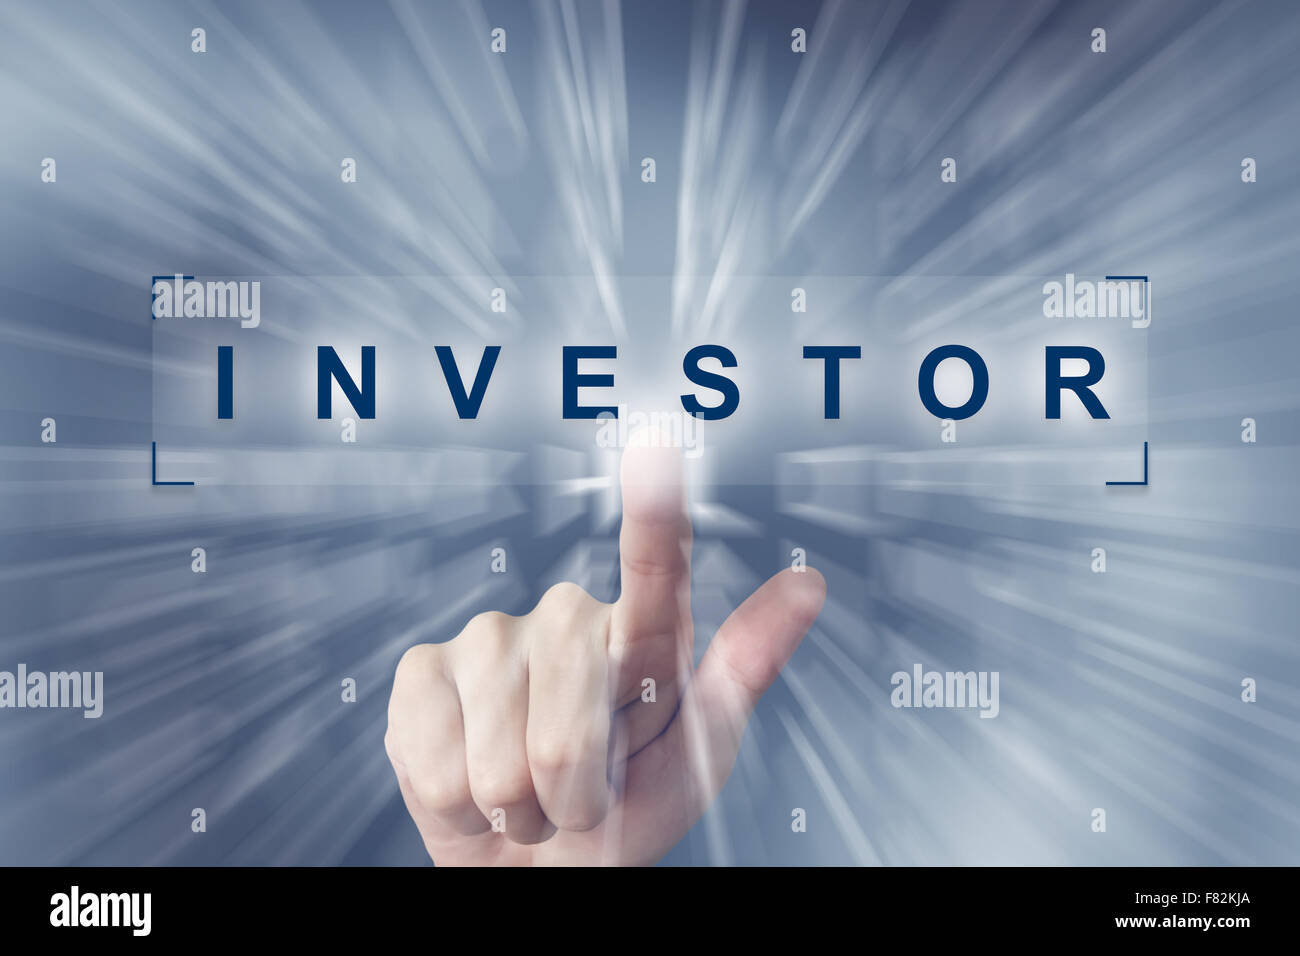 hand clicking on investor button with zoom effect background Stock Photo